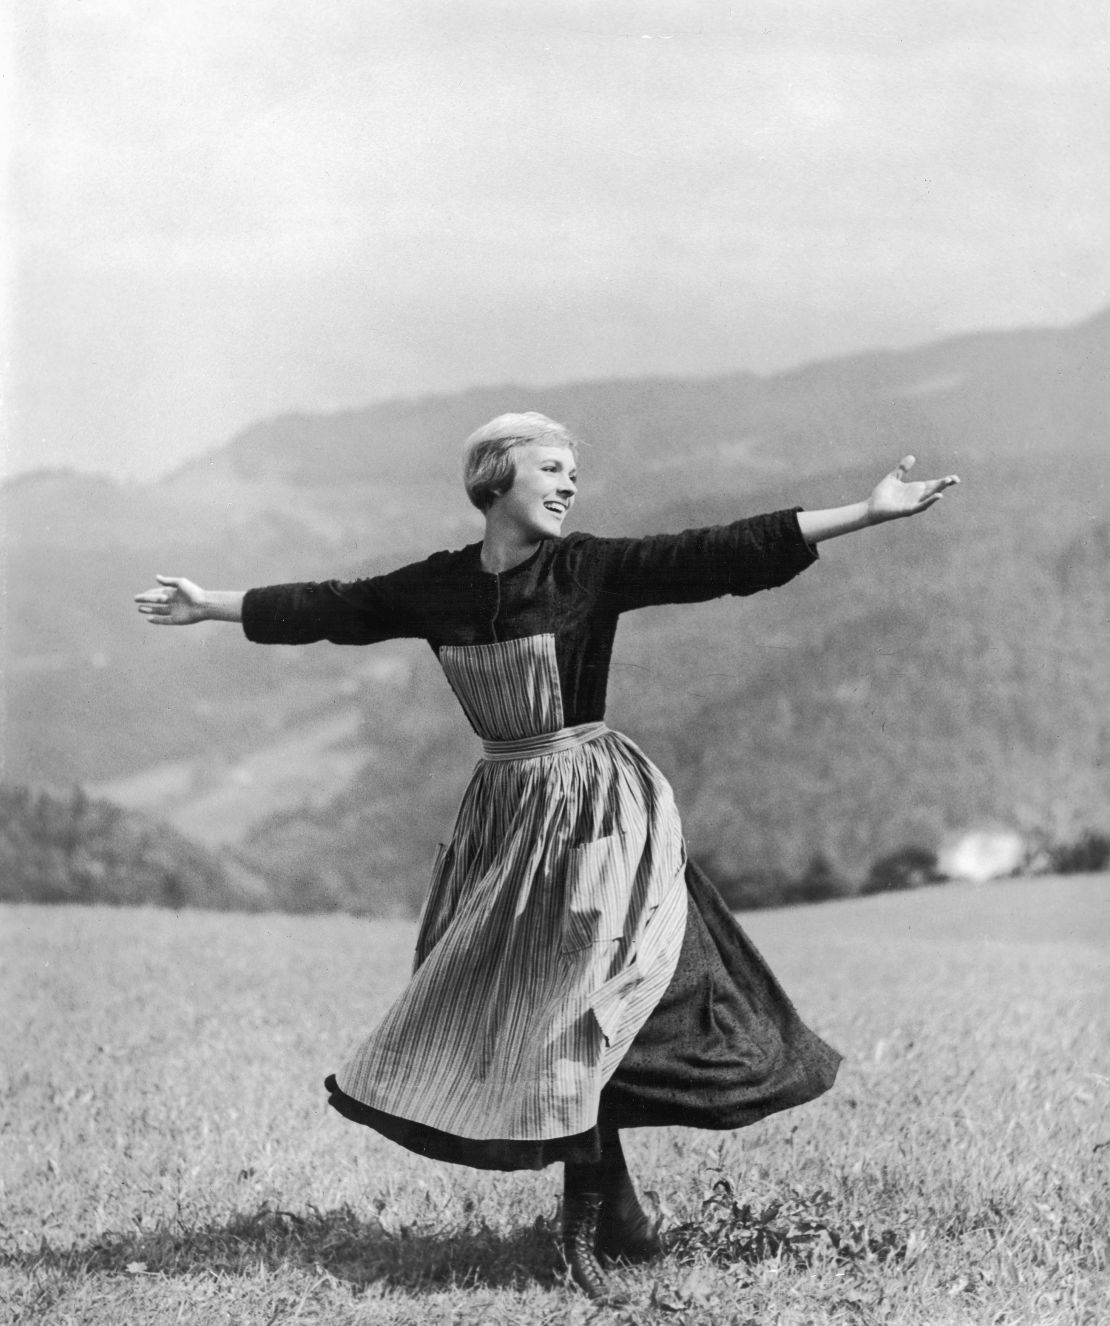 Julie Andrews twirled while singing on top of a mountain in the opening scene of "The Sound of Music." Locals were not amused.